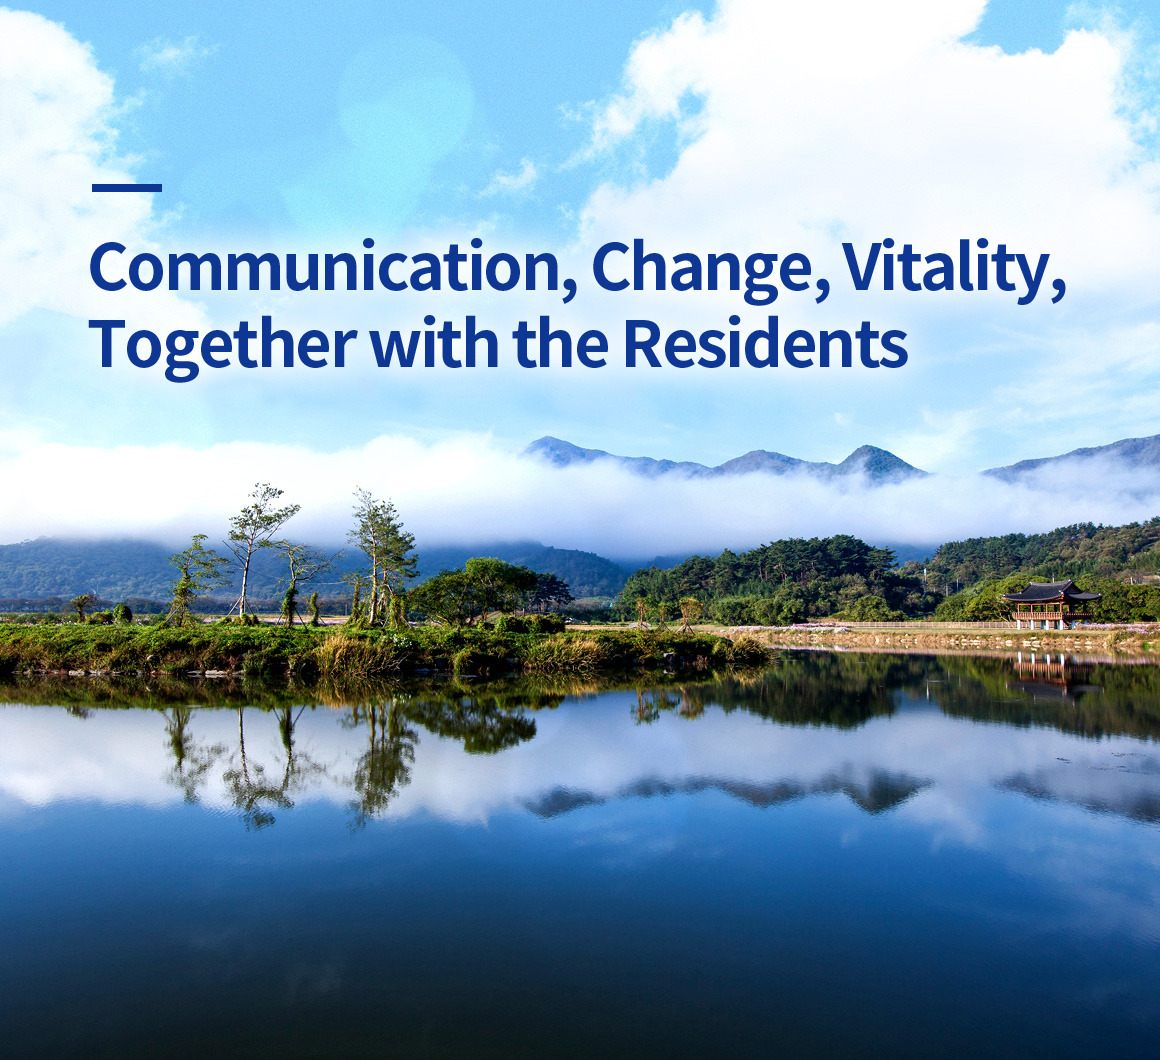 Communication, Change, Vitality, Together with the Residents